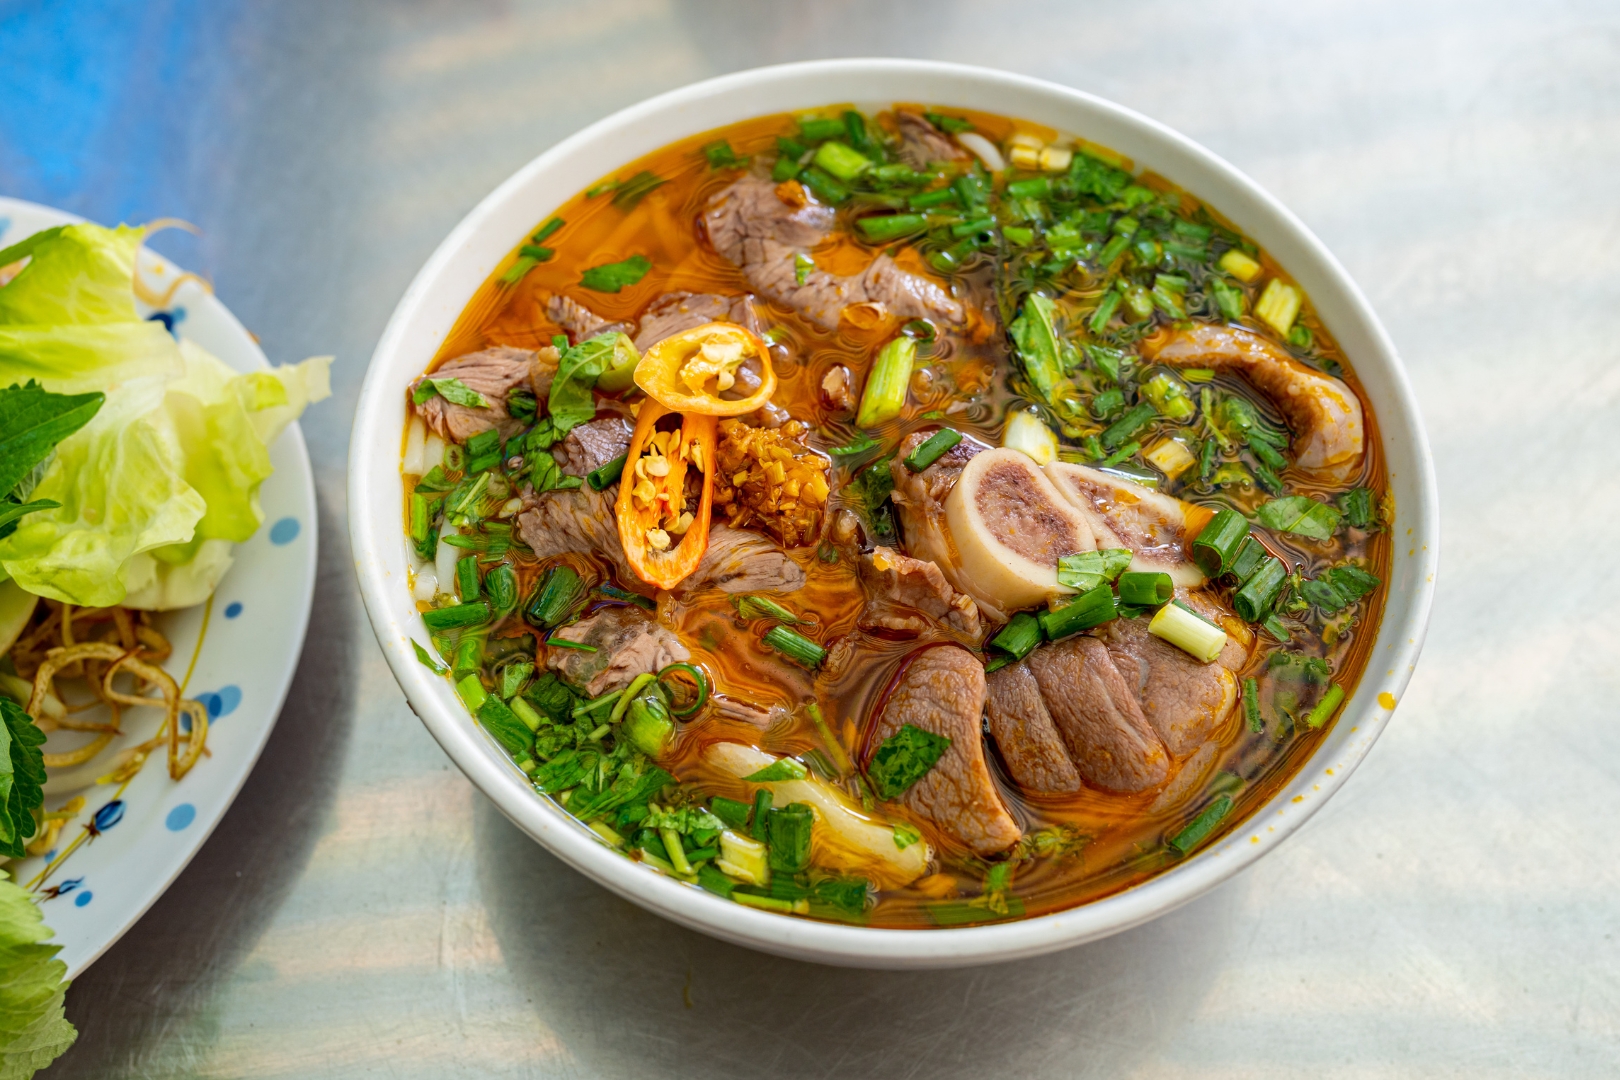 Bún bò Huế is a popular dish in Vietnamese cuisine, especially in Central Vietnam. It is considered a signature dish and is well-loved by many.